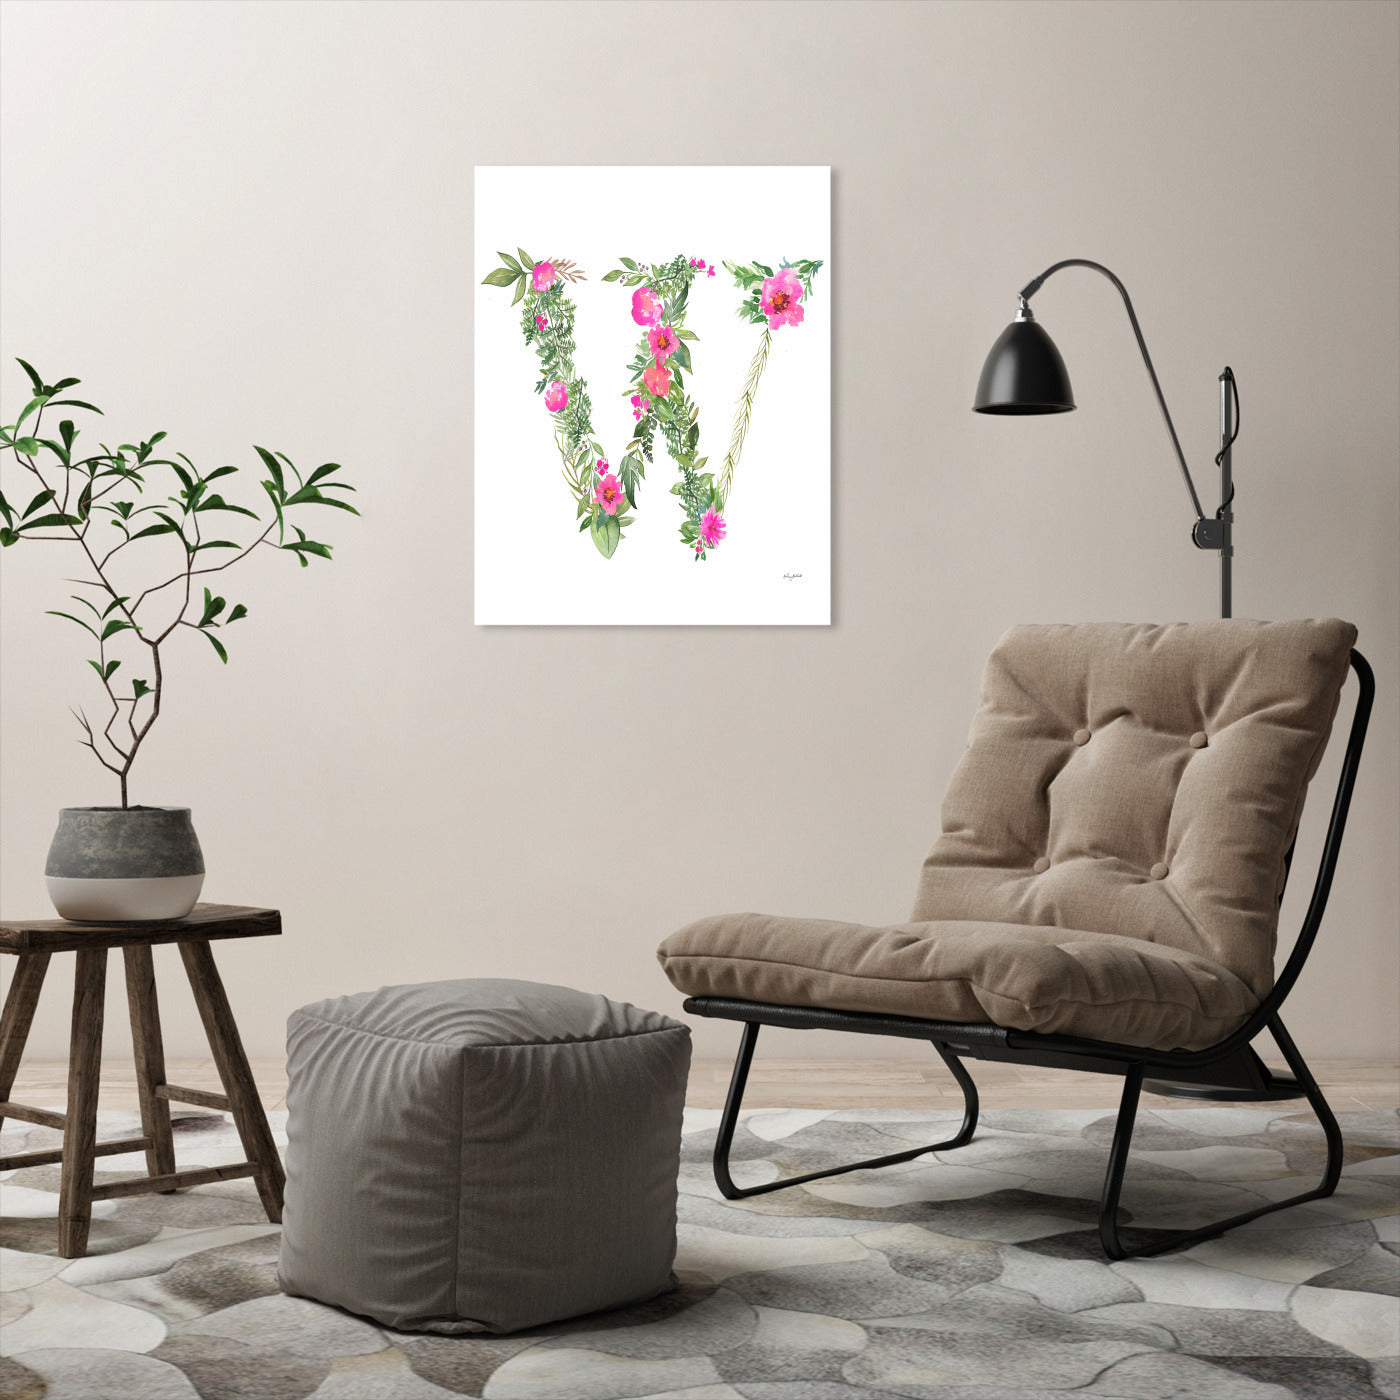 Botanical Letter W by Kelsey Mcnatt - Wrapped Canvas - Wrapped Canvas - Americanflat